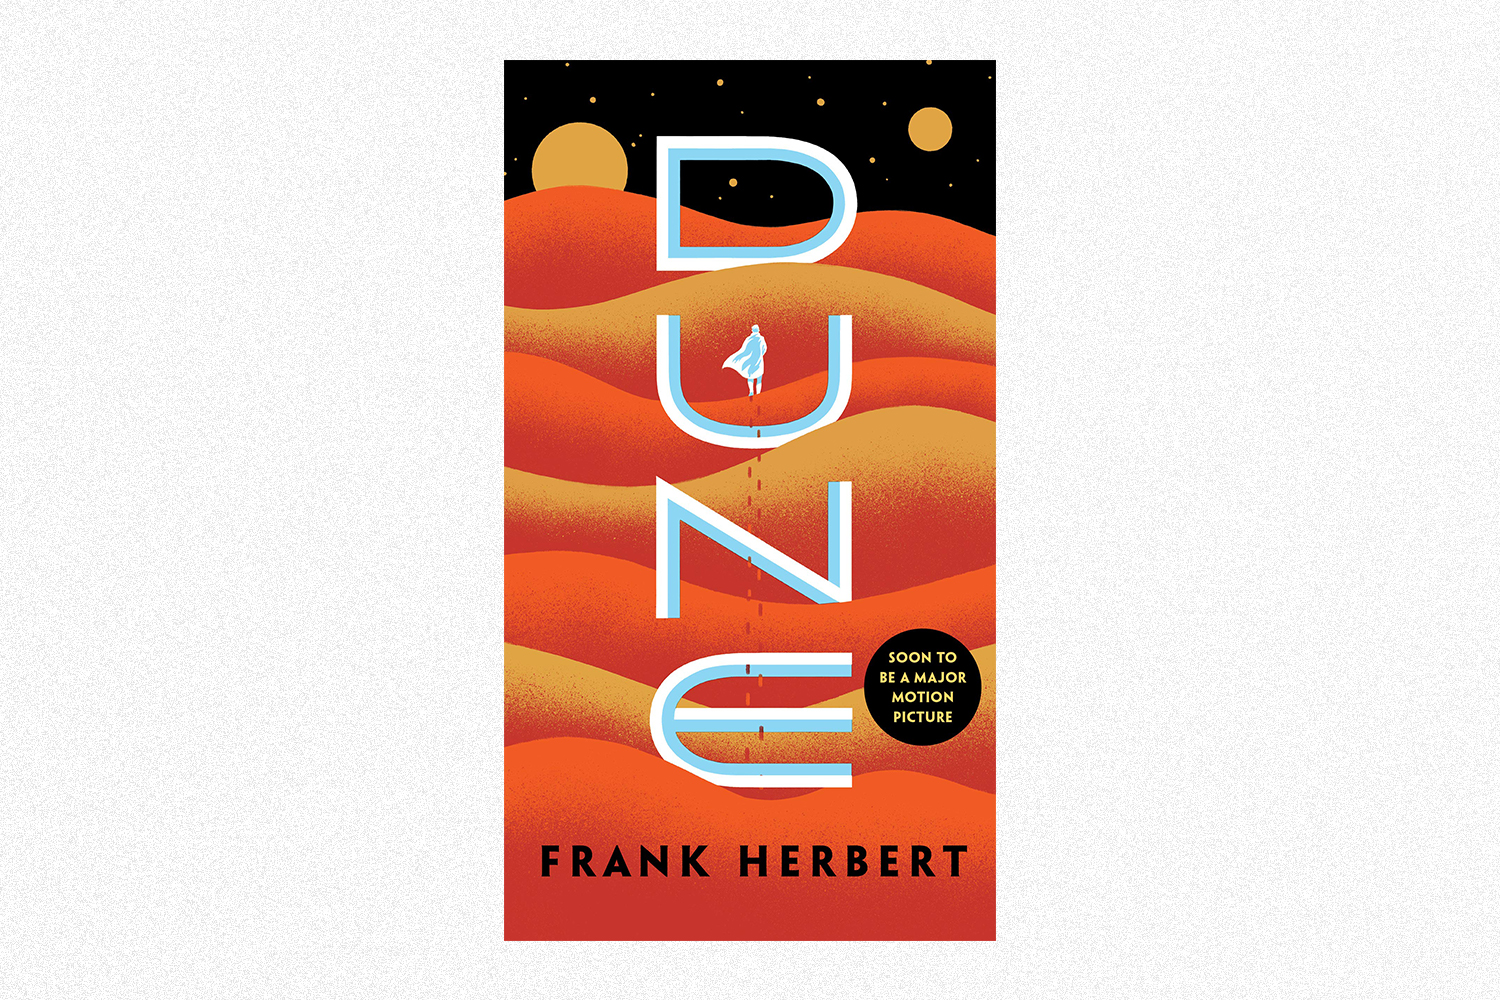 The book cover for Dune by Frank Herbert